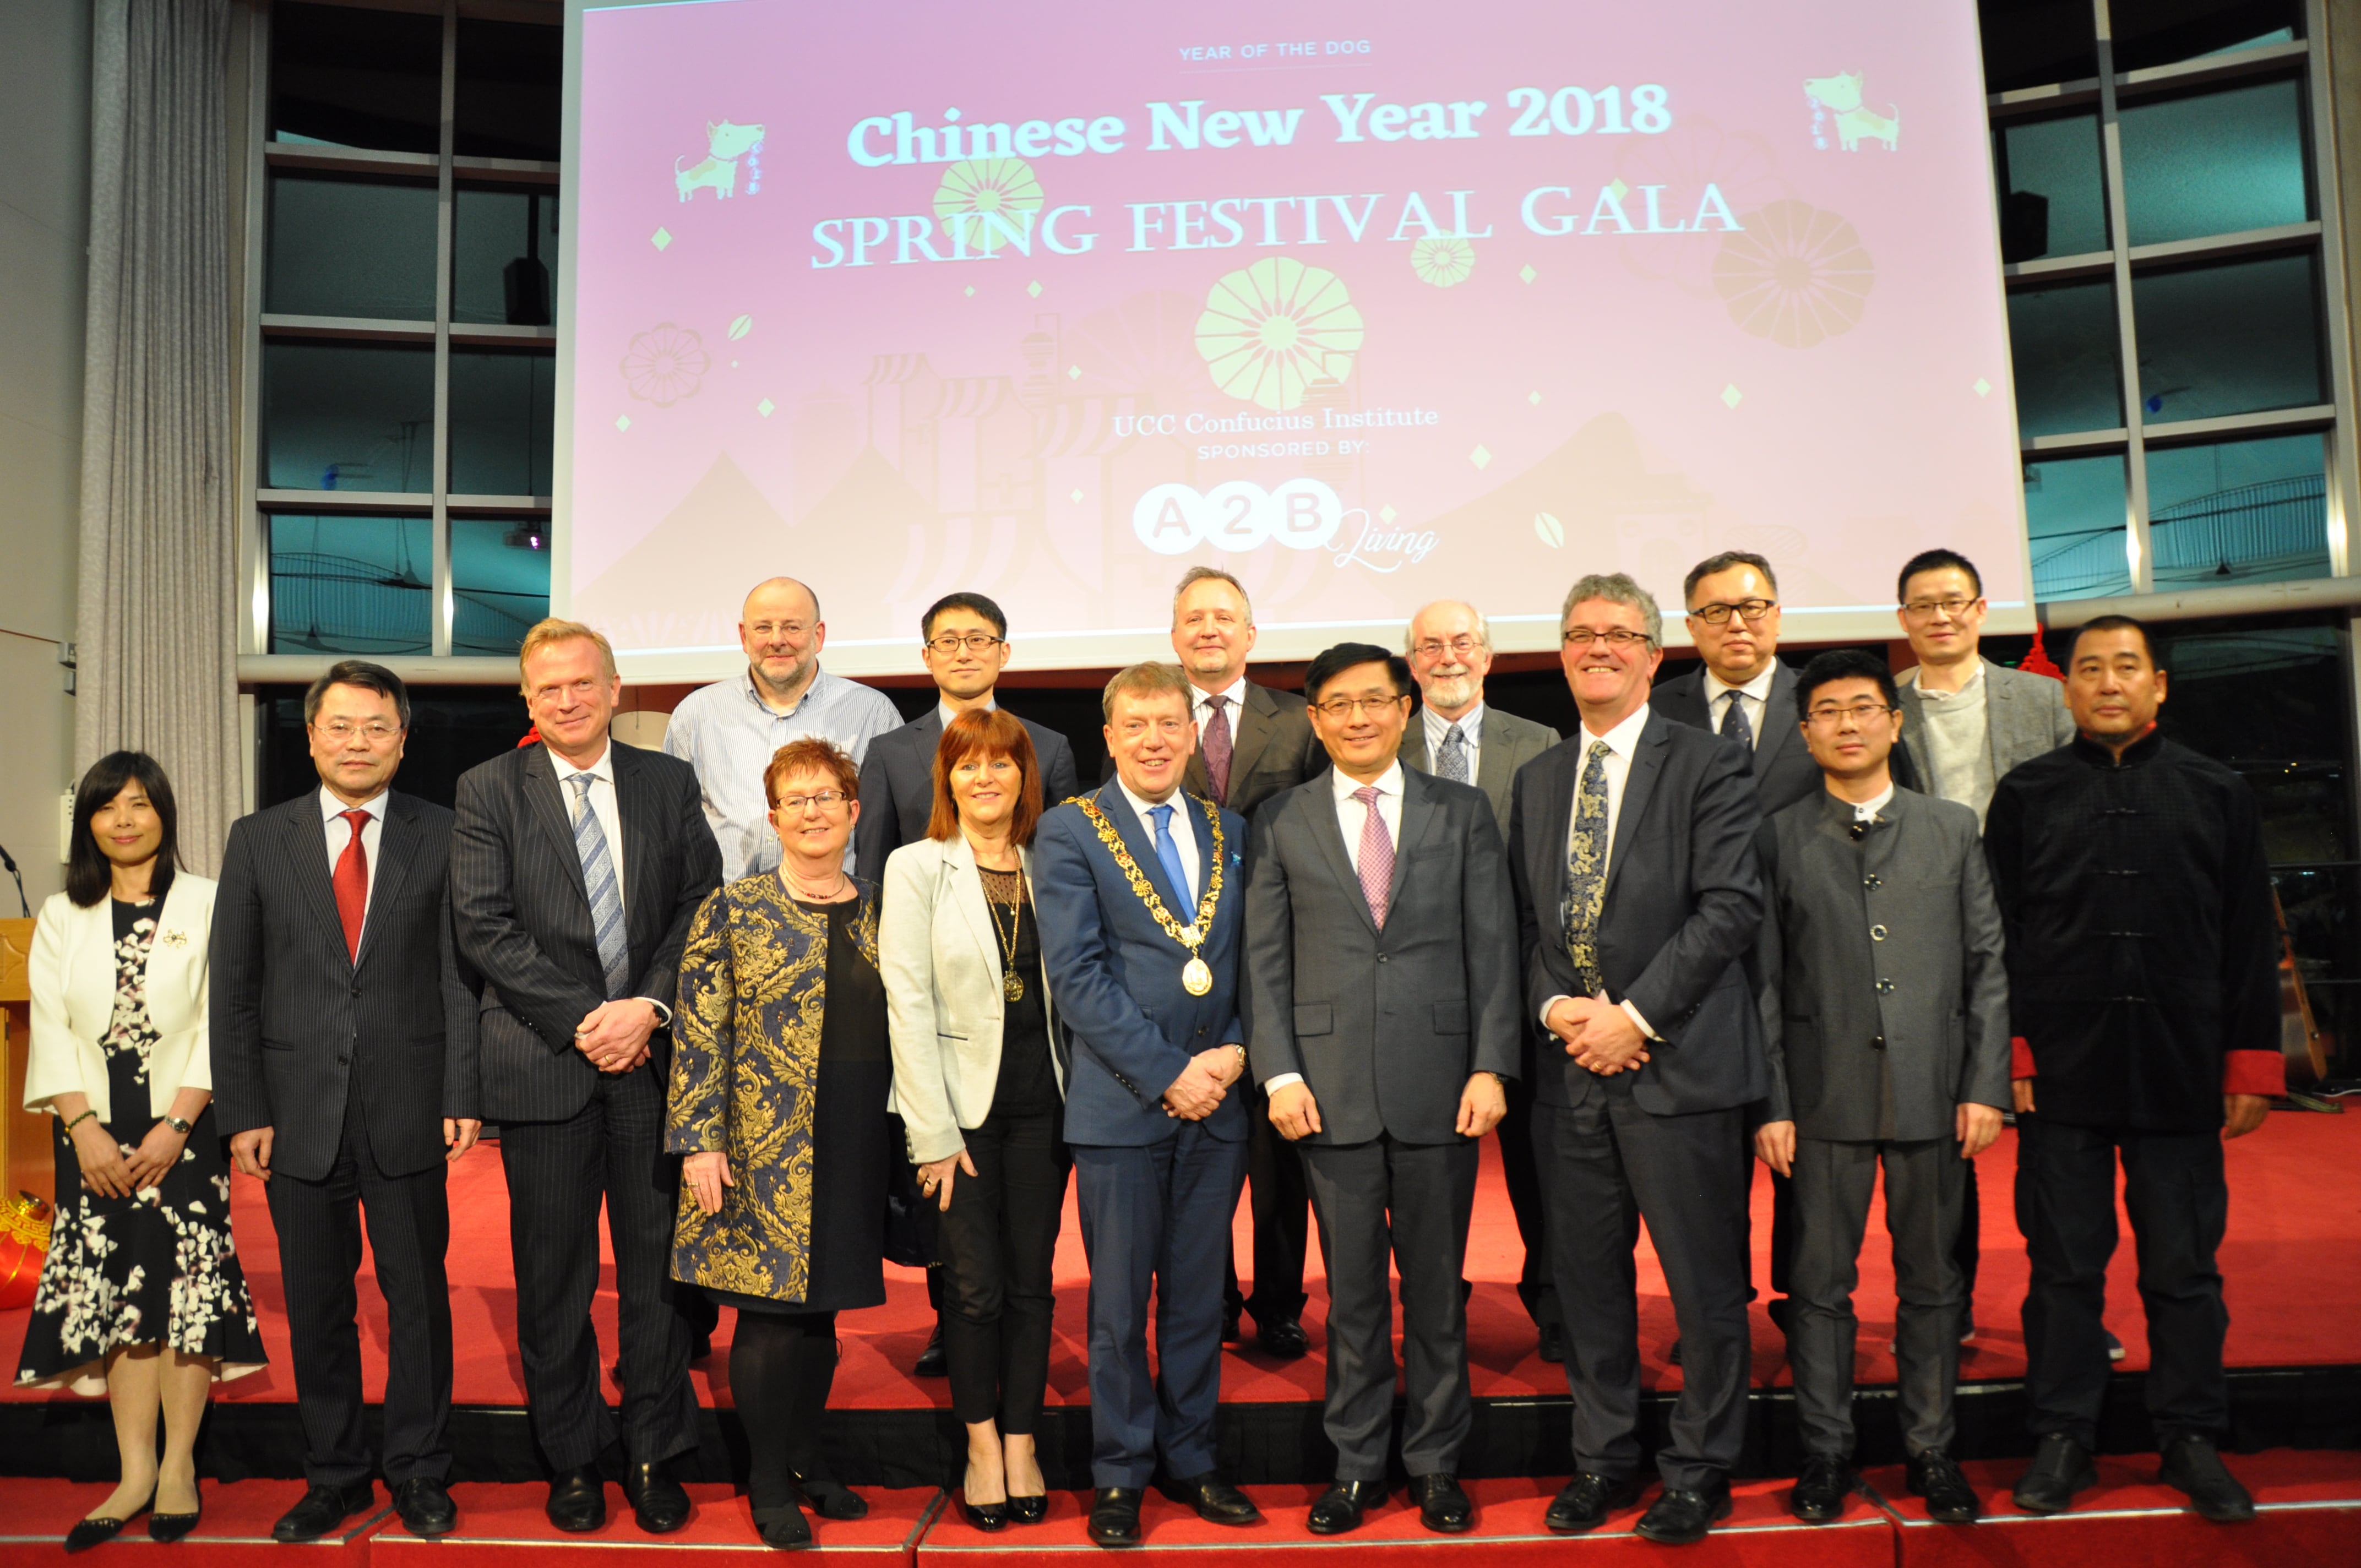 UCC Confucius Institute Successfully Holds 2018 Chinese New Year Celebrations